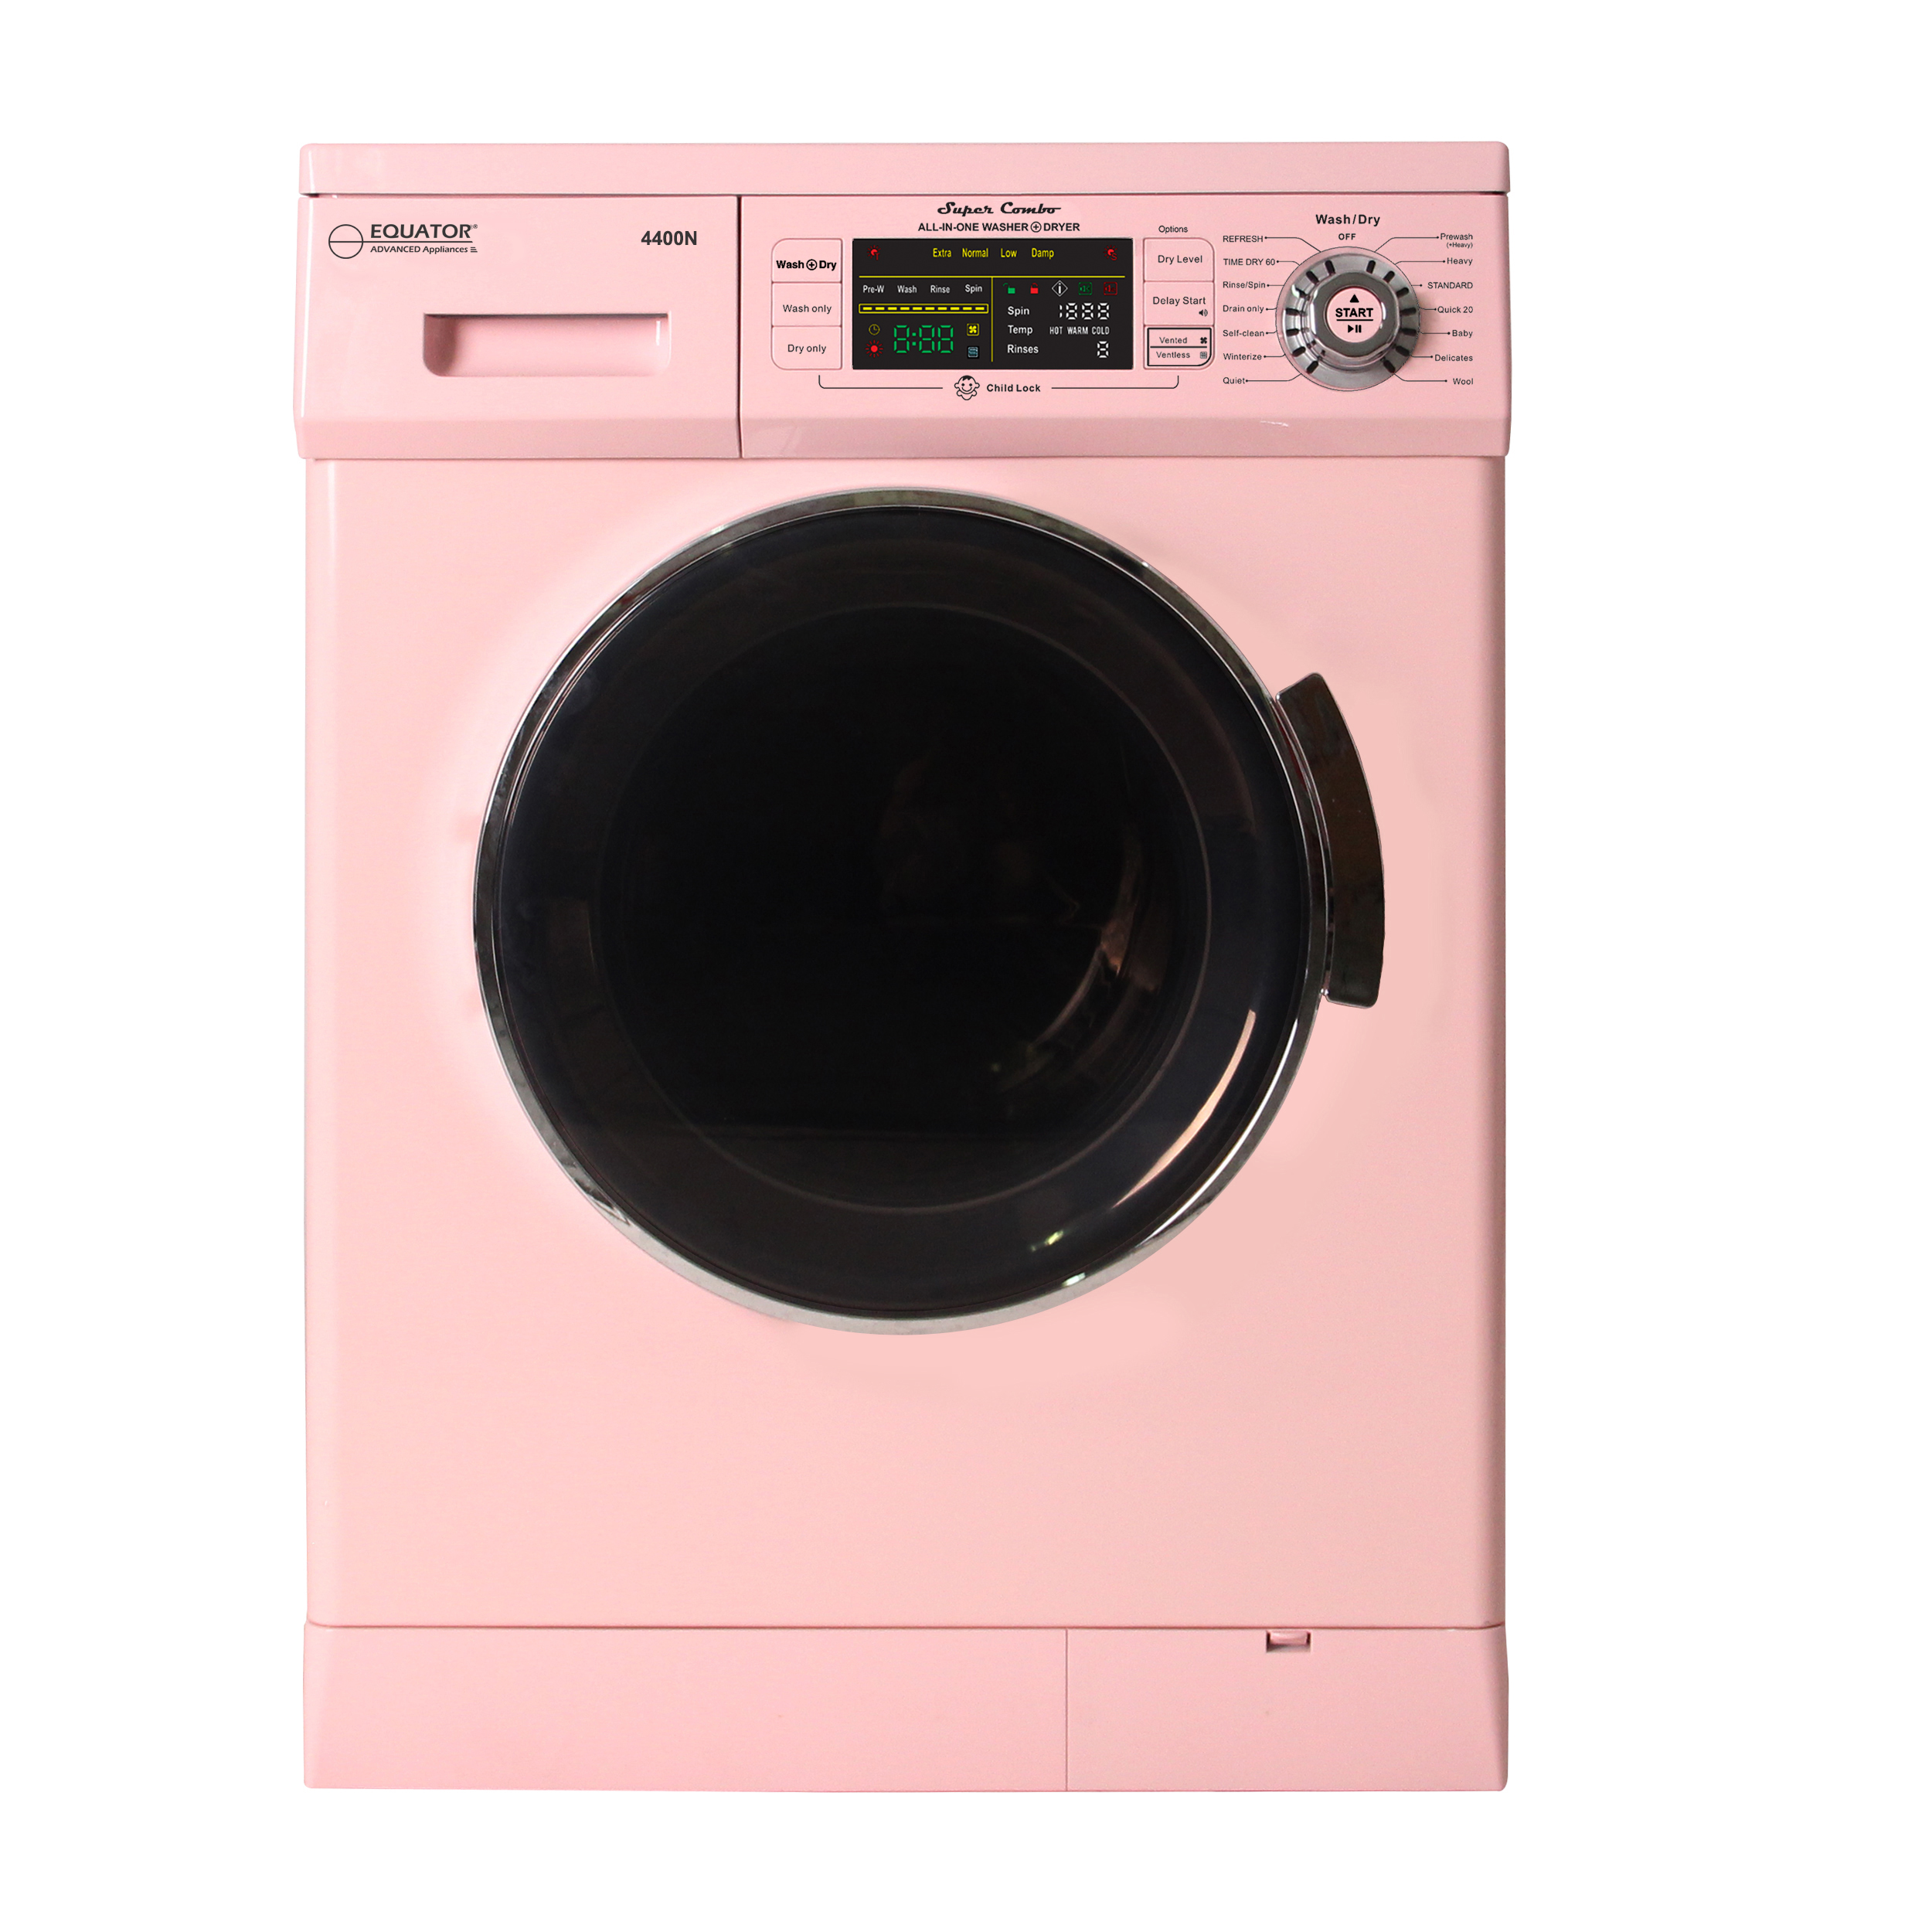 All-in-one 1200 RPM New 2019 Version Compact Convertible Combo Washer Dryer with Fully Digital Control Panel Pink